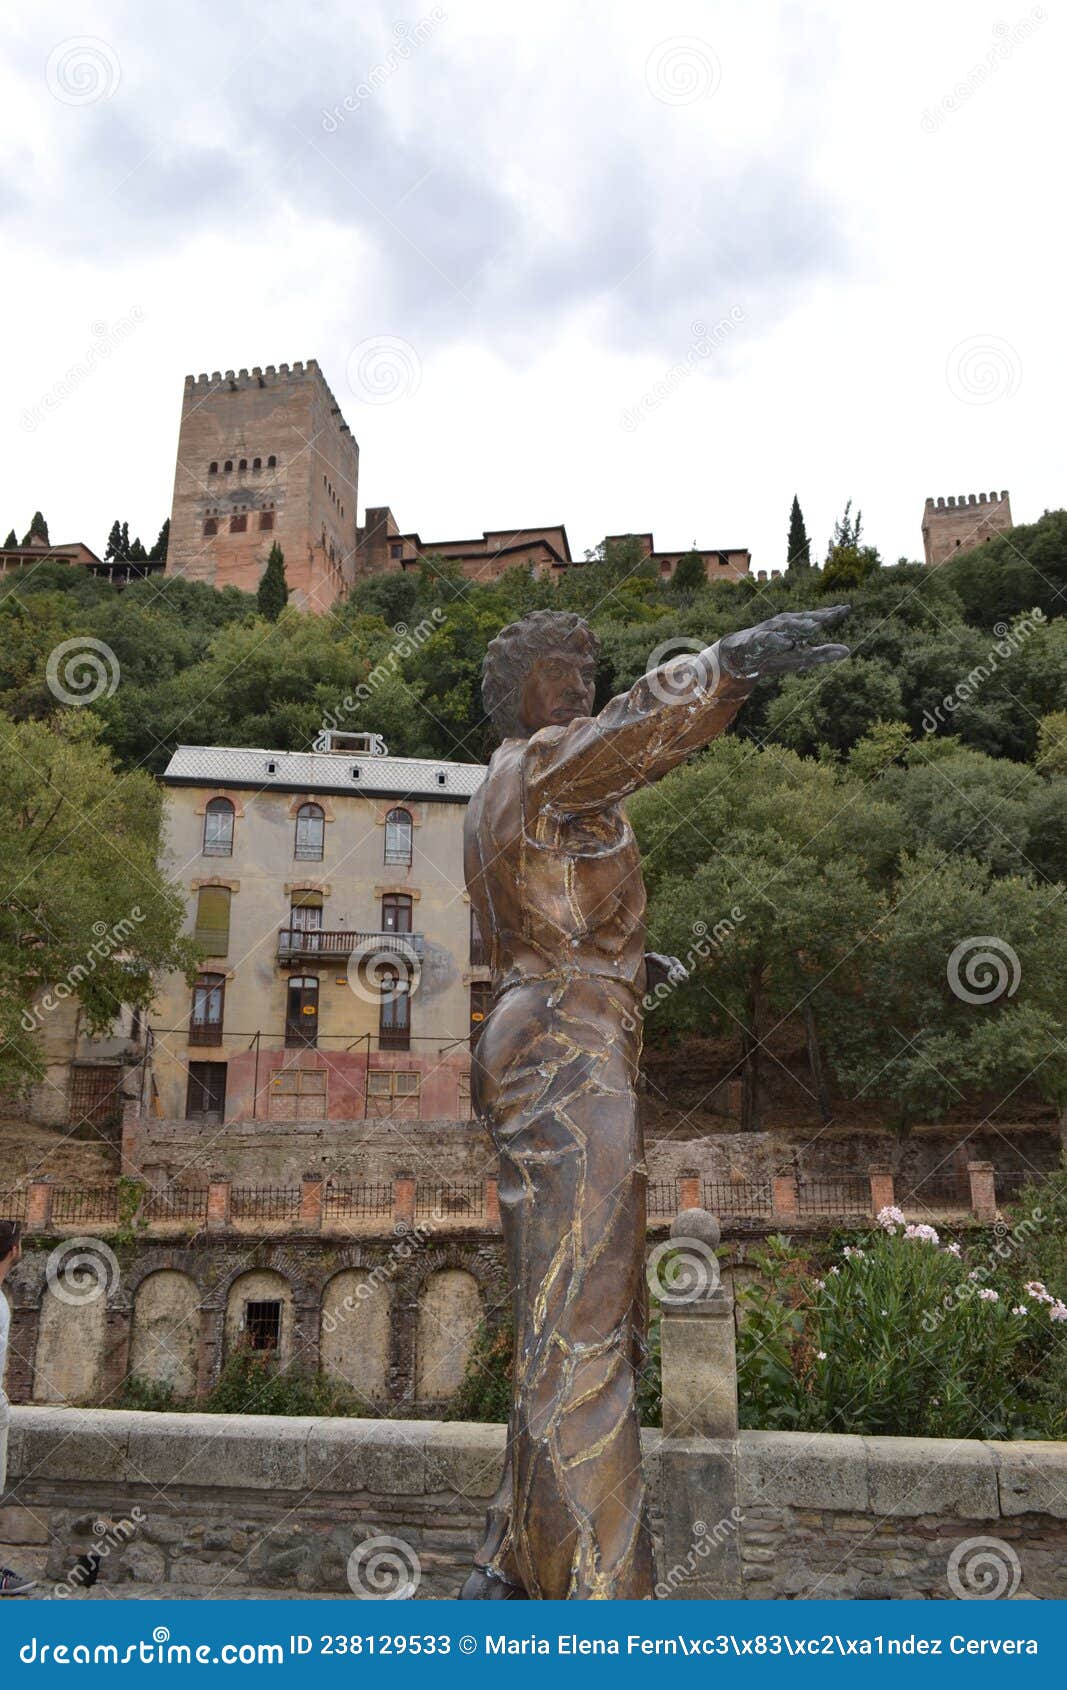 bailaor sculpture in paseo de los tristes with the alhambra and the reuma hotel in the background